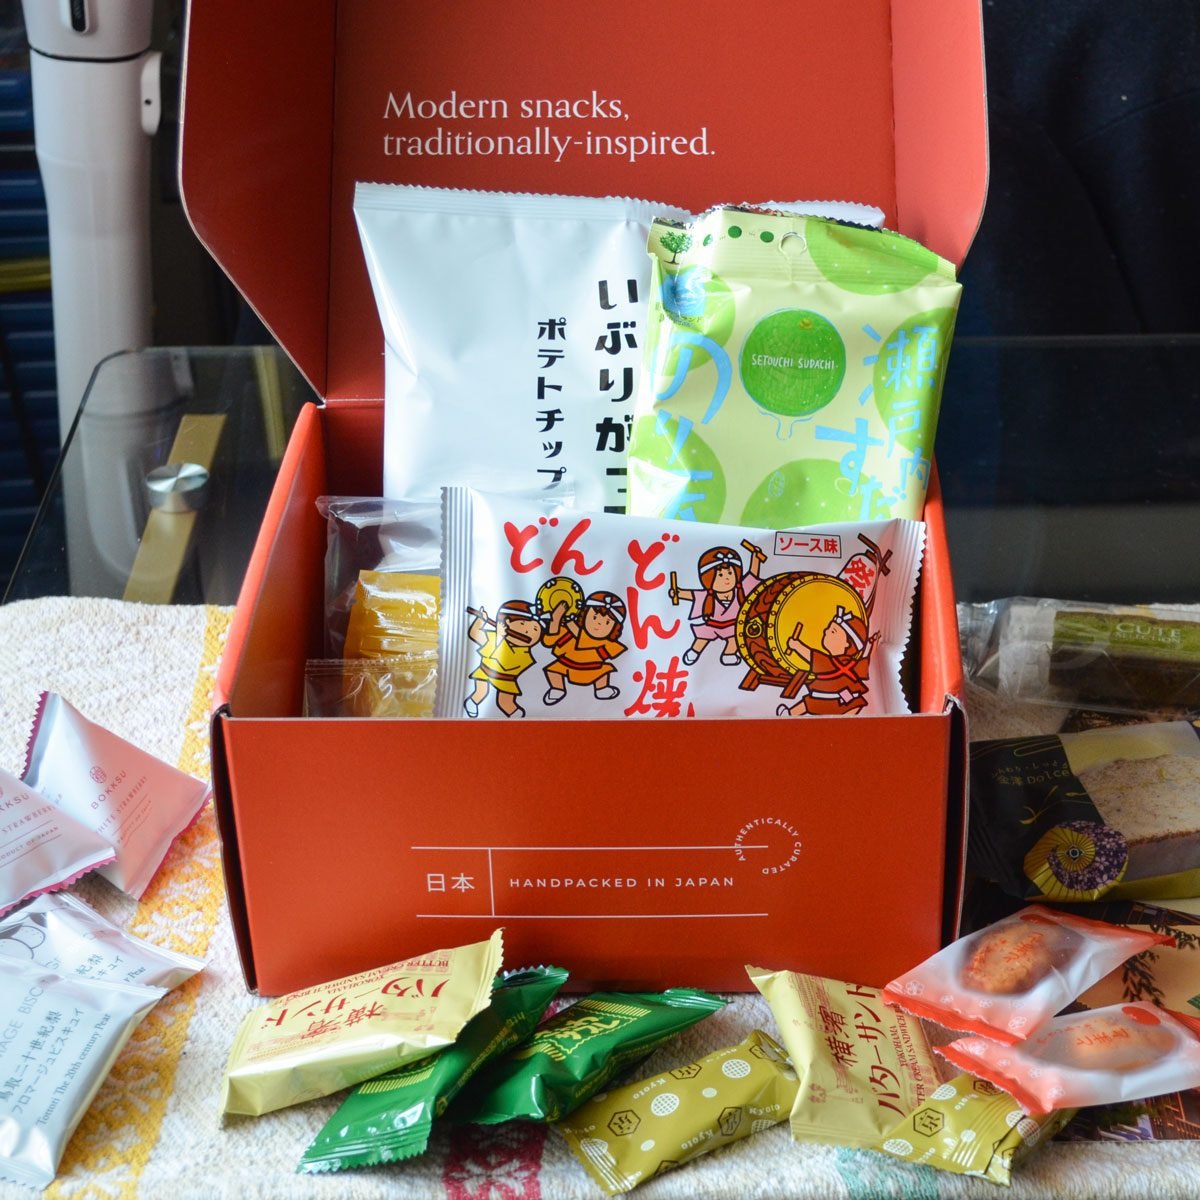 Bokksu box placed on a table